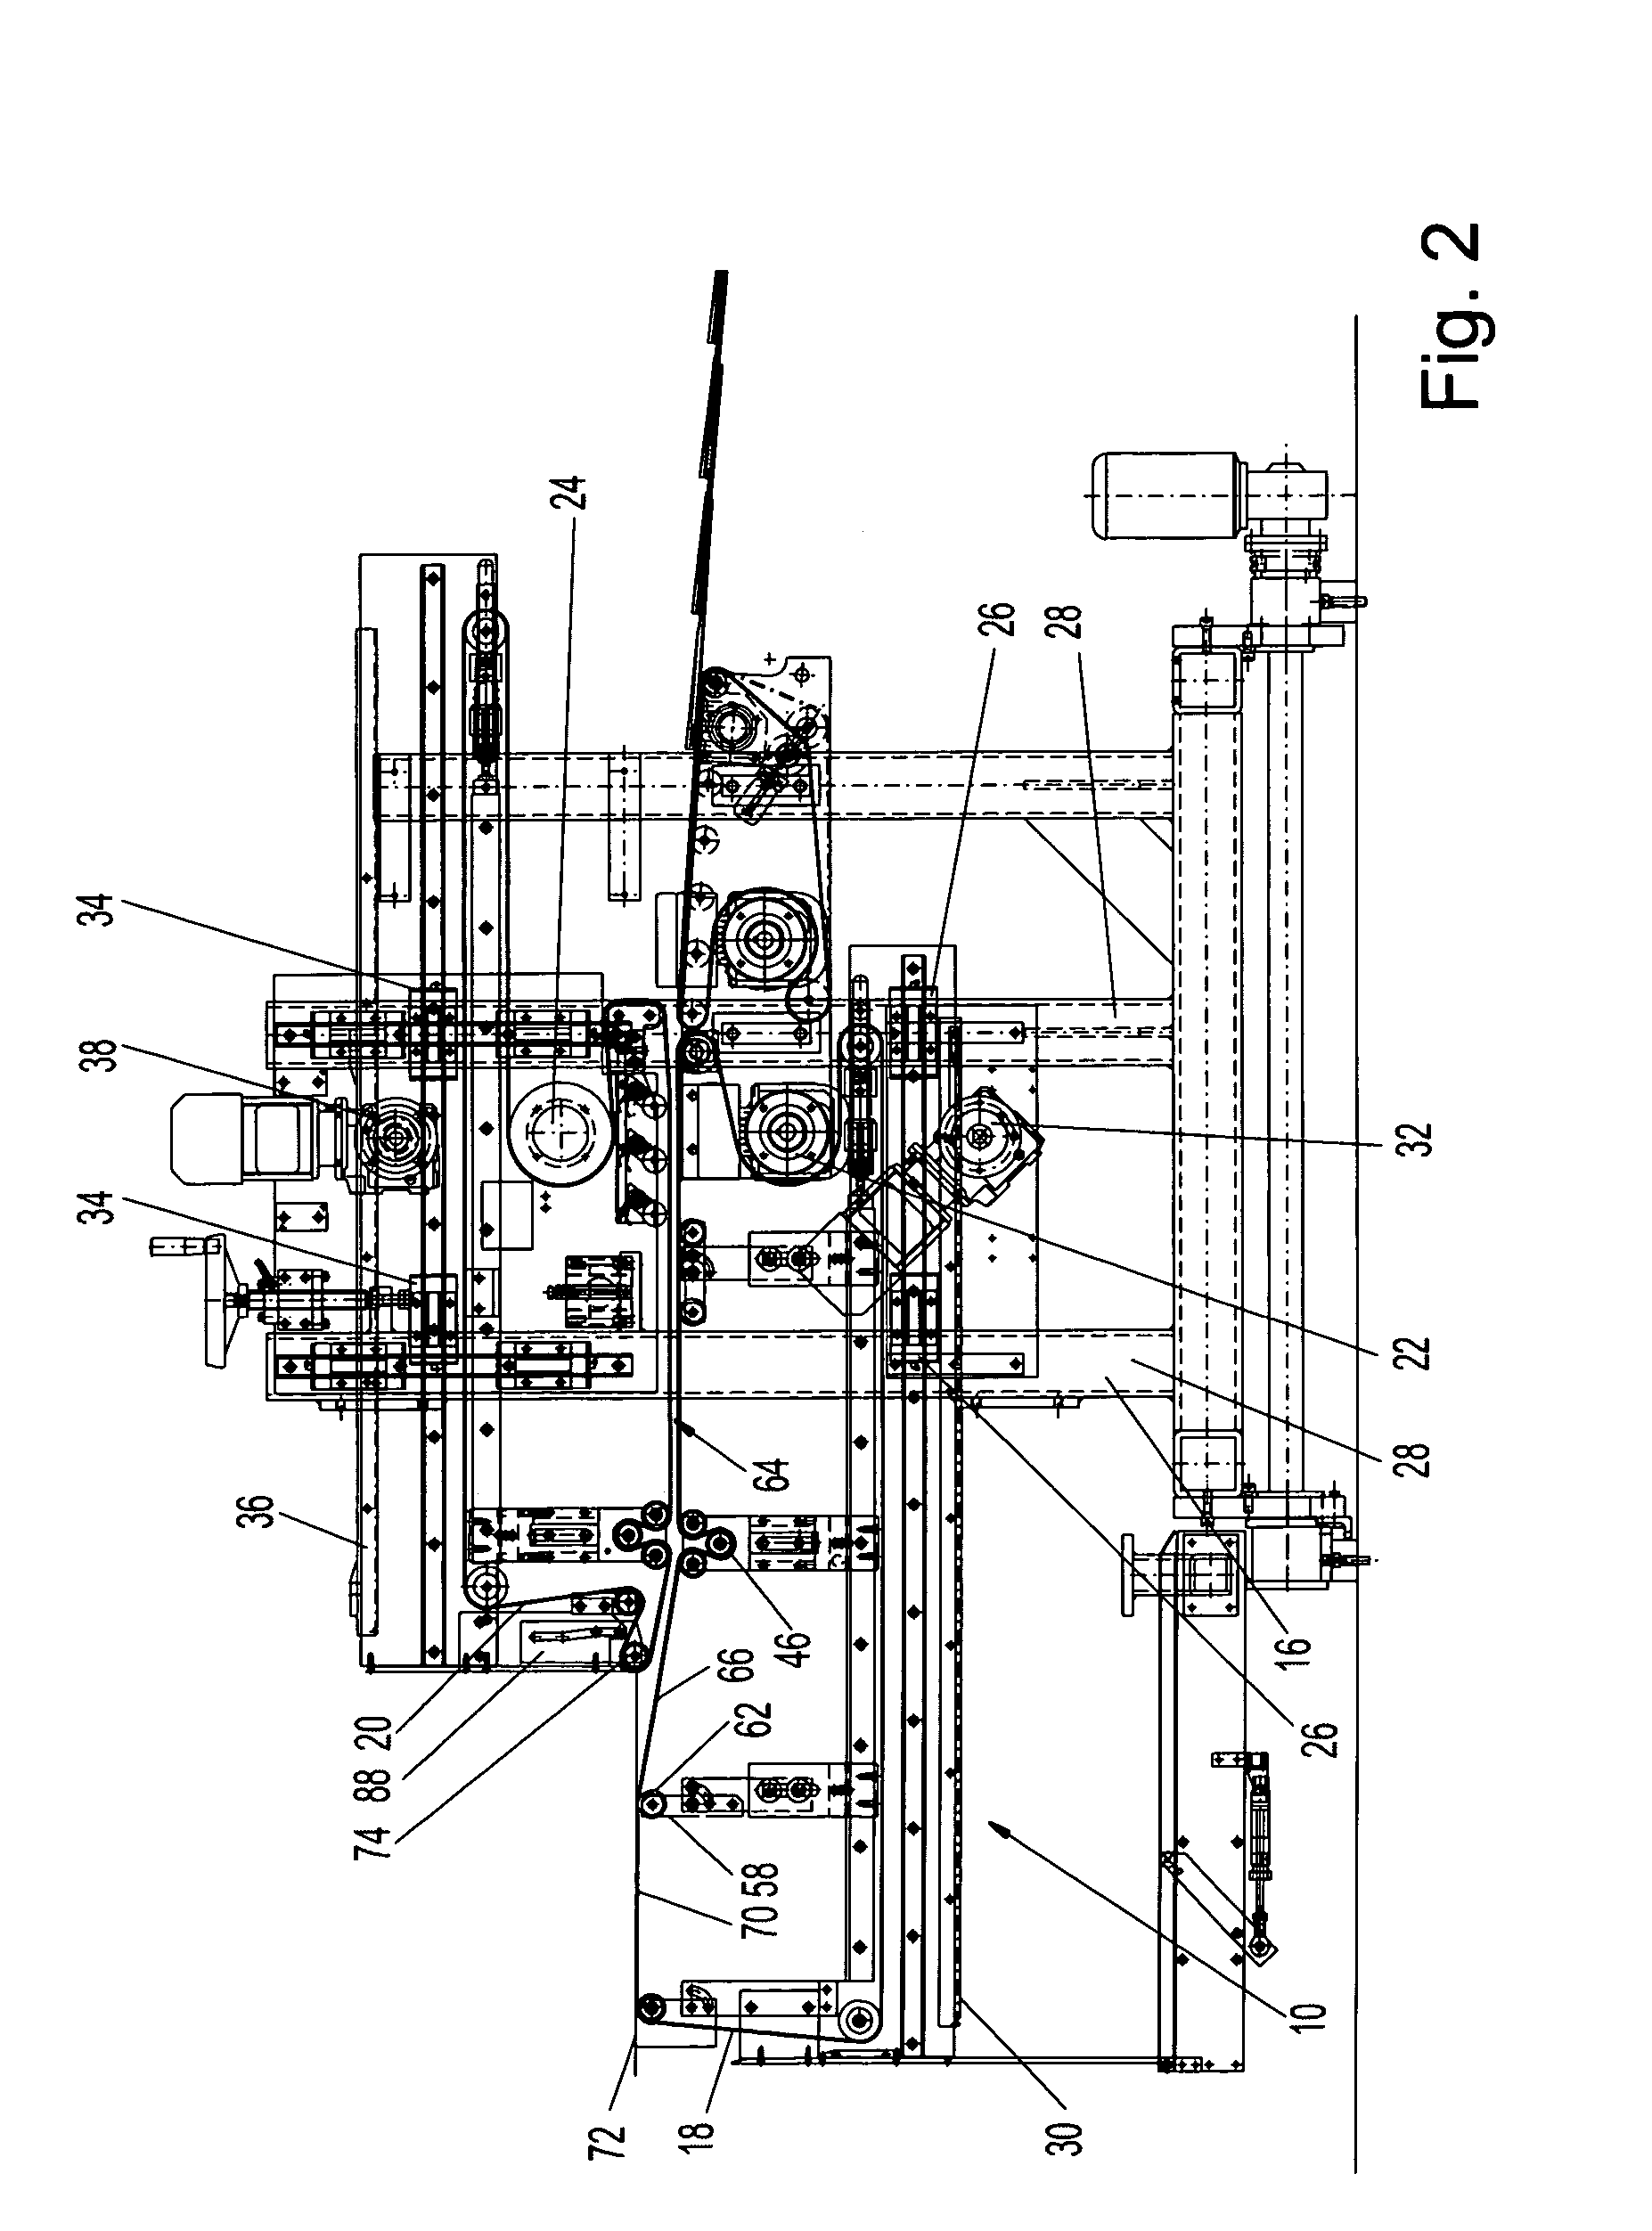 Device for stacking flat products